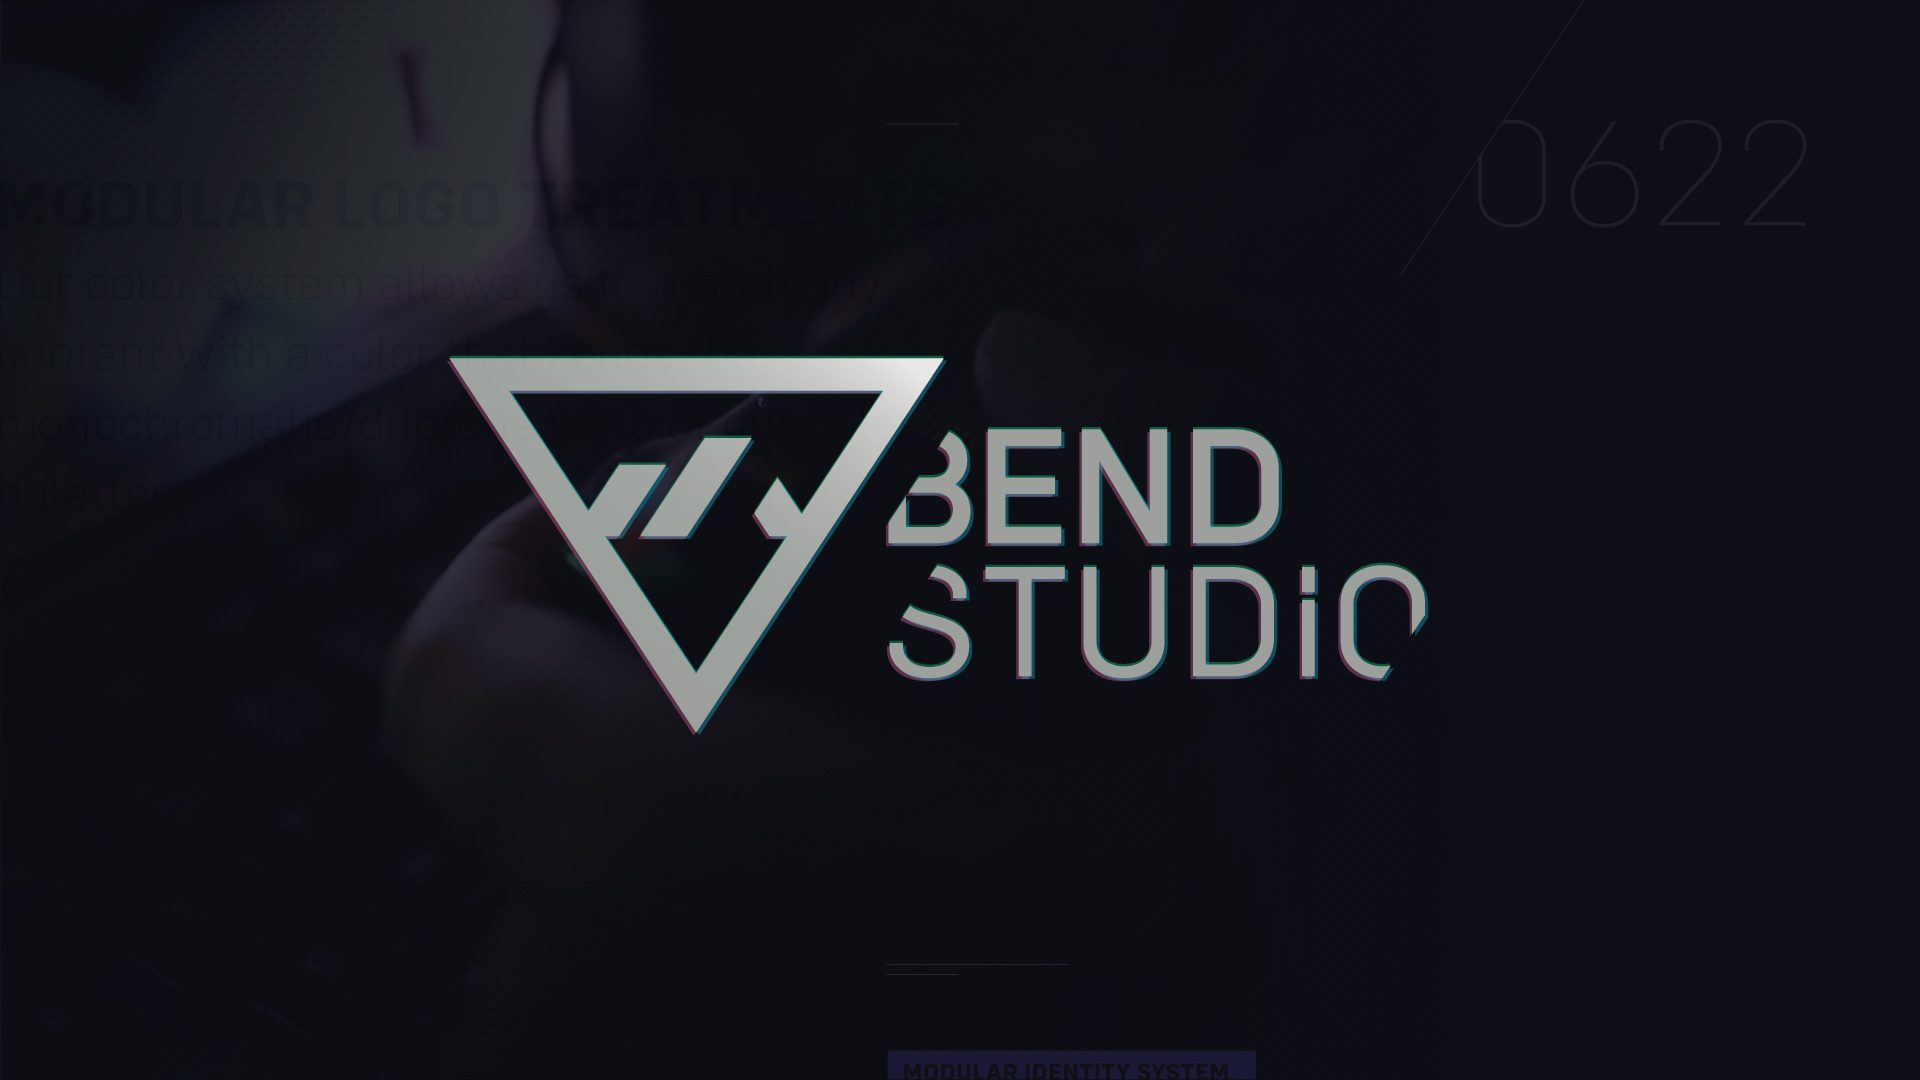 A new look for Bend Studio’s future, and a look back at its past